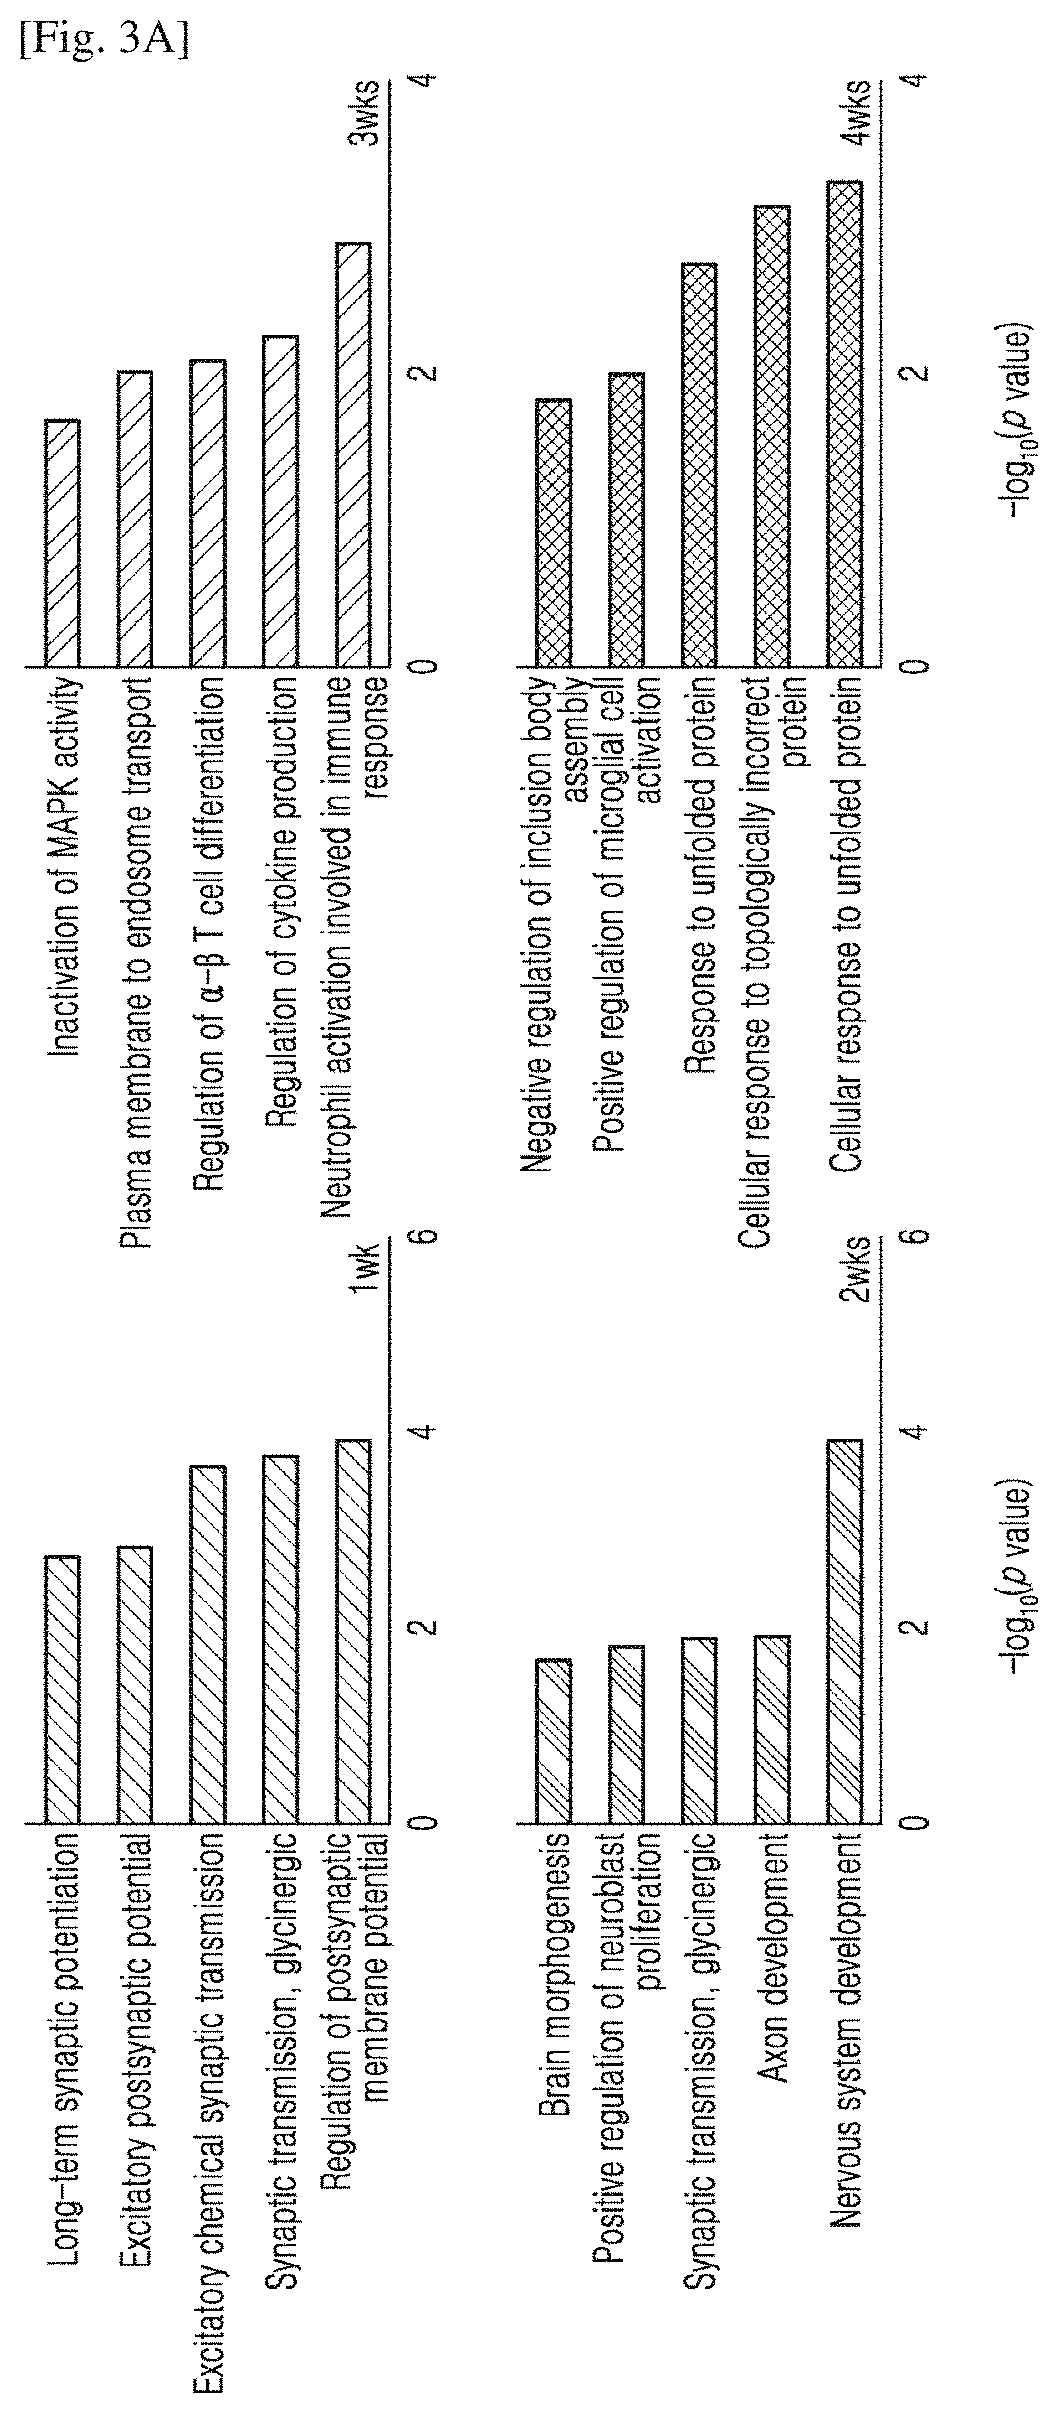 Administration method and dosage regimen for treatment of neurodegenerative diseases using trametinib and markers